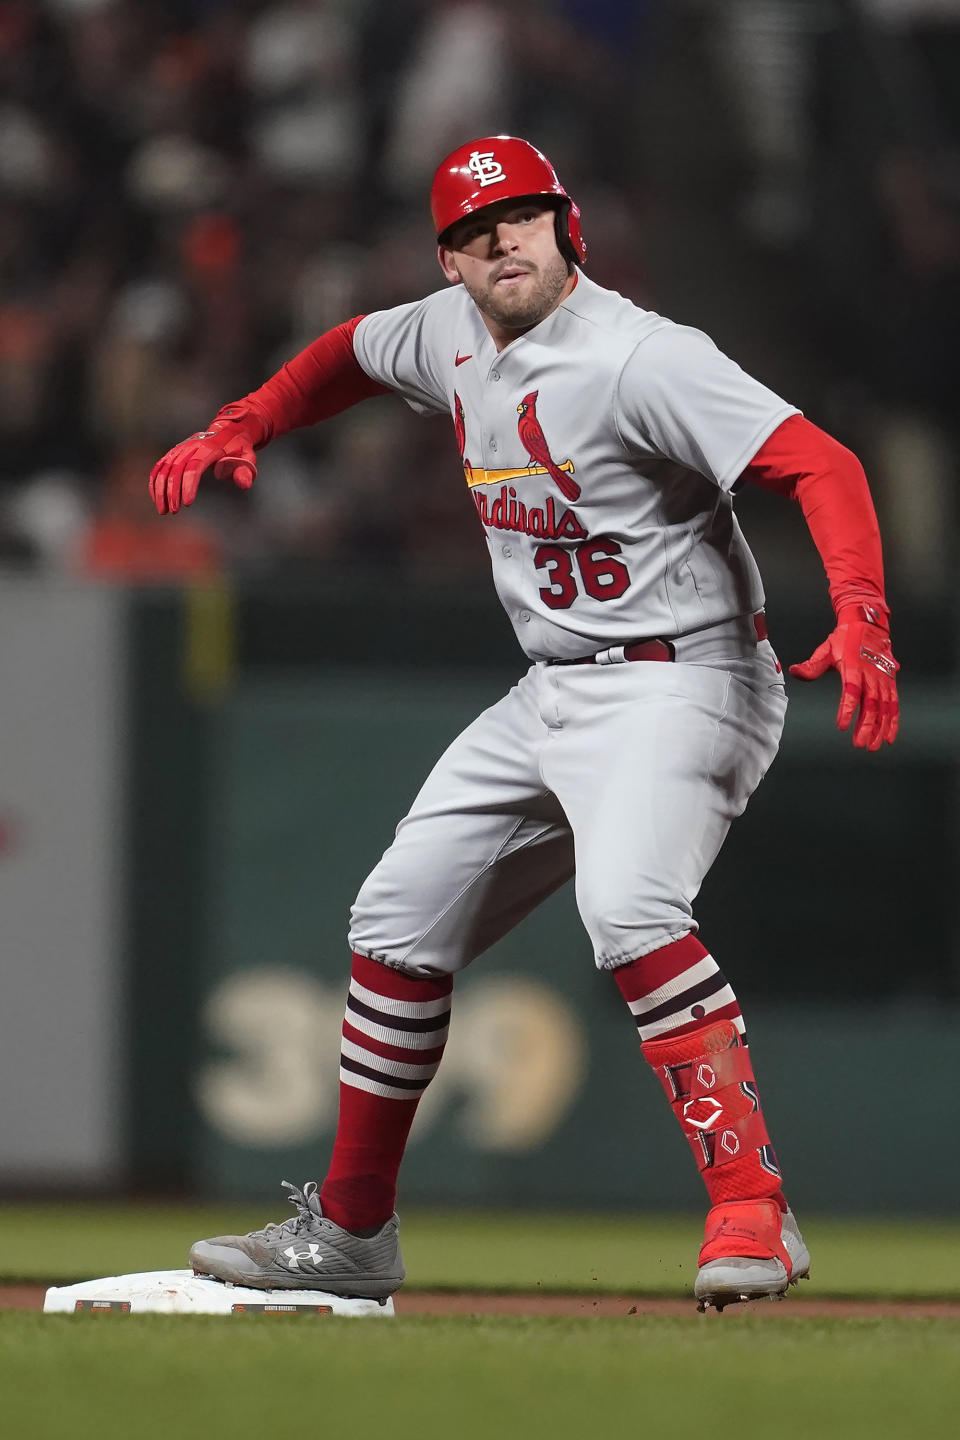 St. Louis Cardinals' Juan Yepez celebrates after hitting a double against the San Francisco Giants during the ninth inning of a baseball game in San Francisco, Friday, May 6, 2022. (AP Photo/Jeff Chiu)